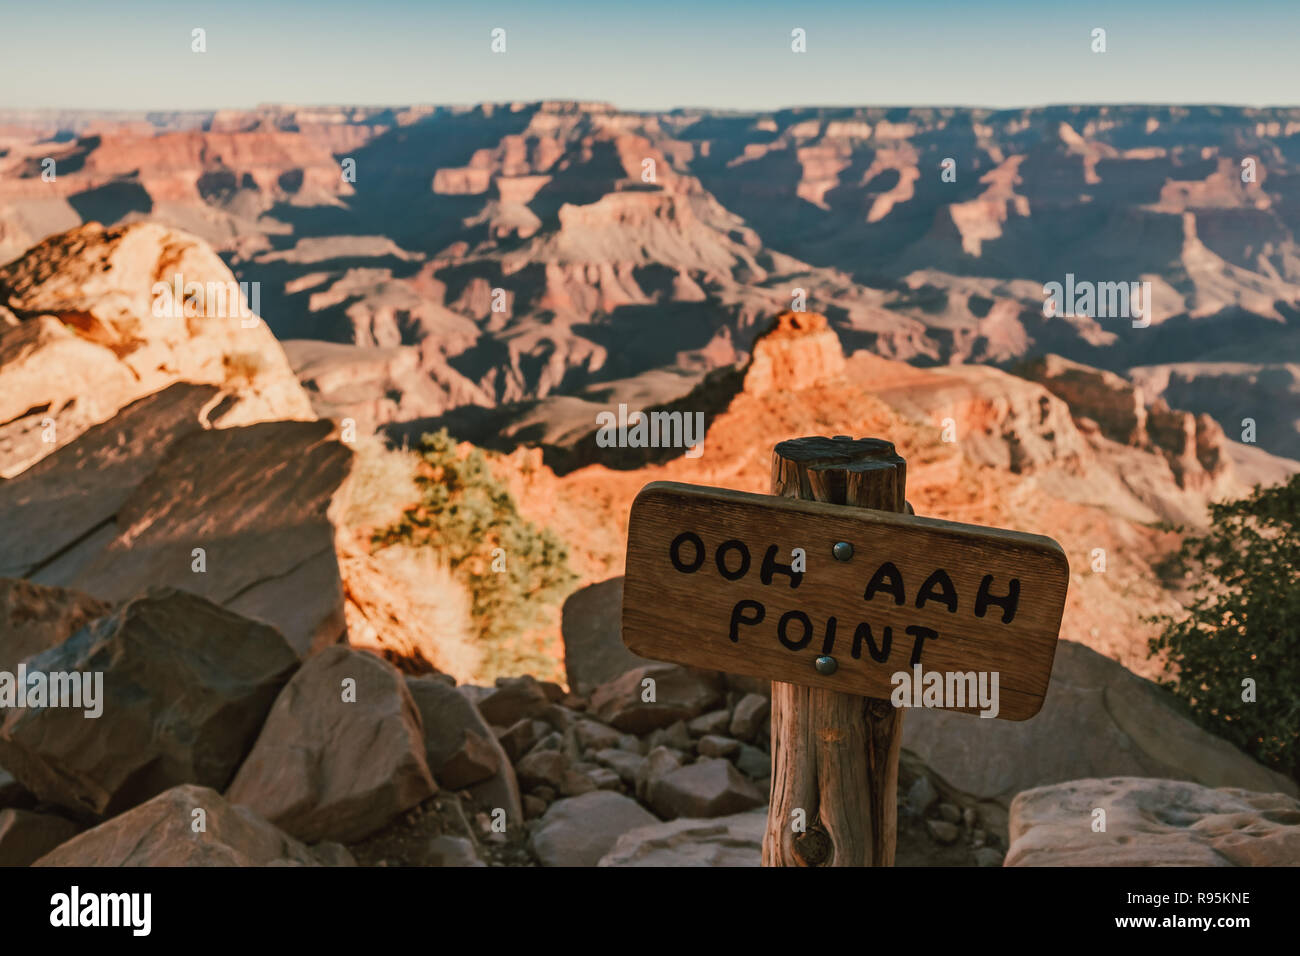 A sign of OOH AAH Point on the South Kaibab Trail in the Grand Canyon at Grand Canyon National Park in Arizona, USA Stock Photo